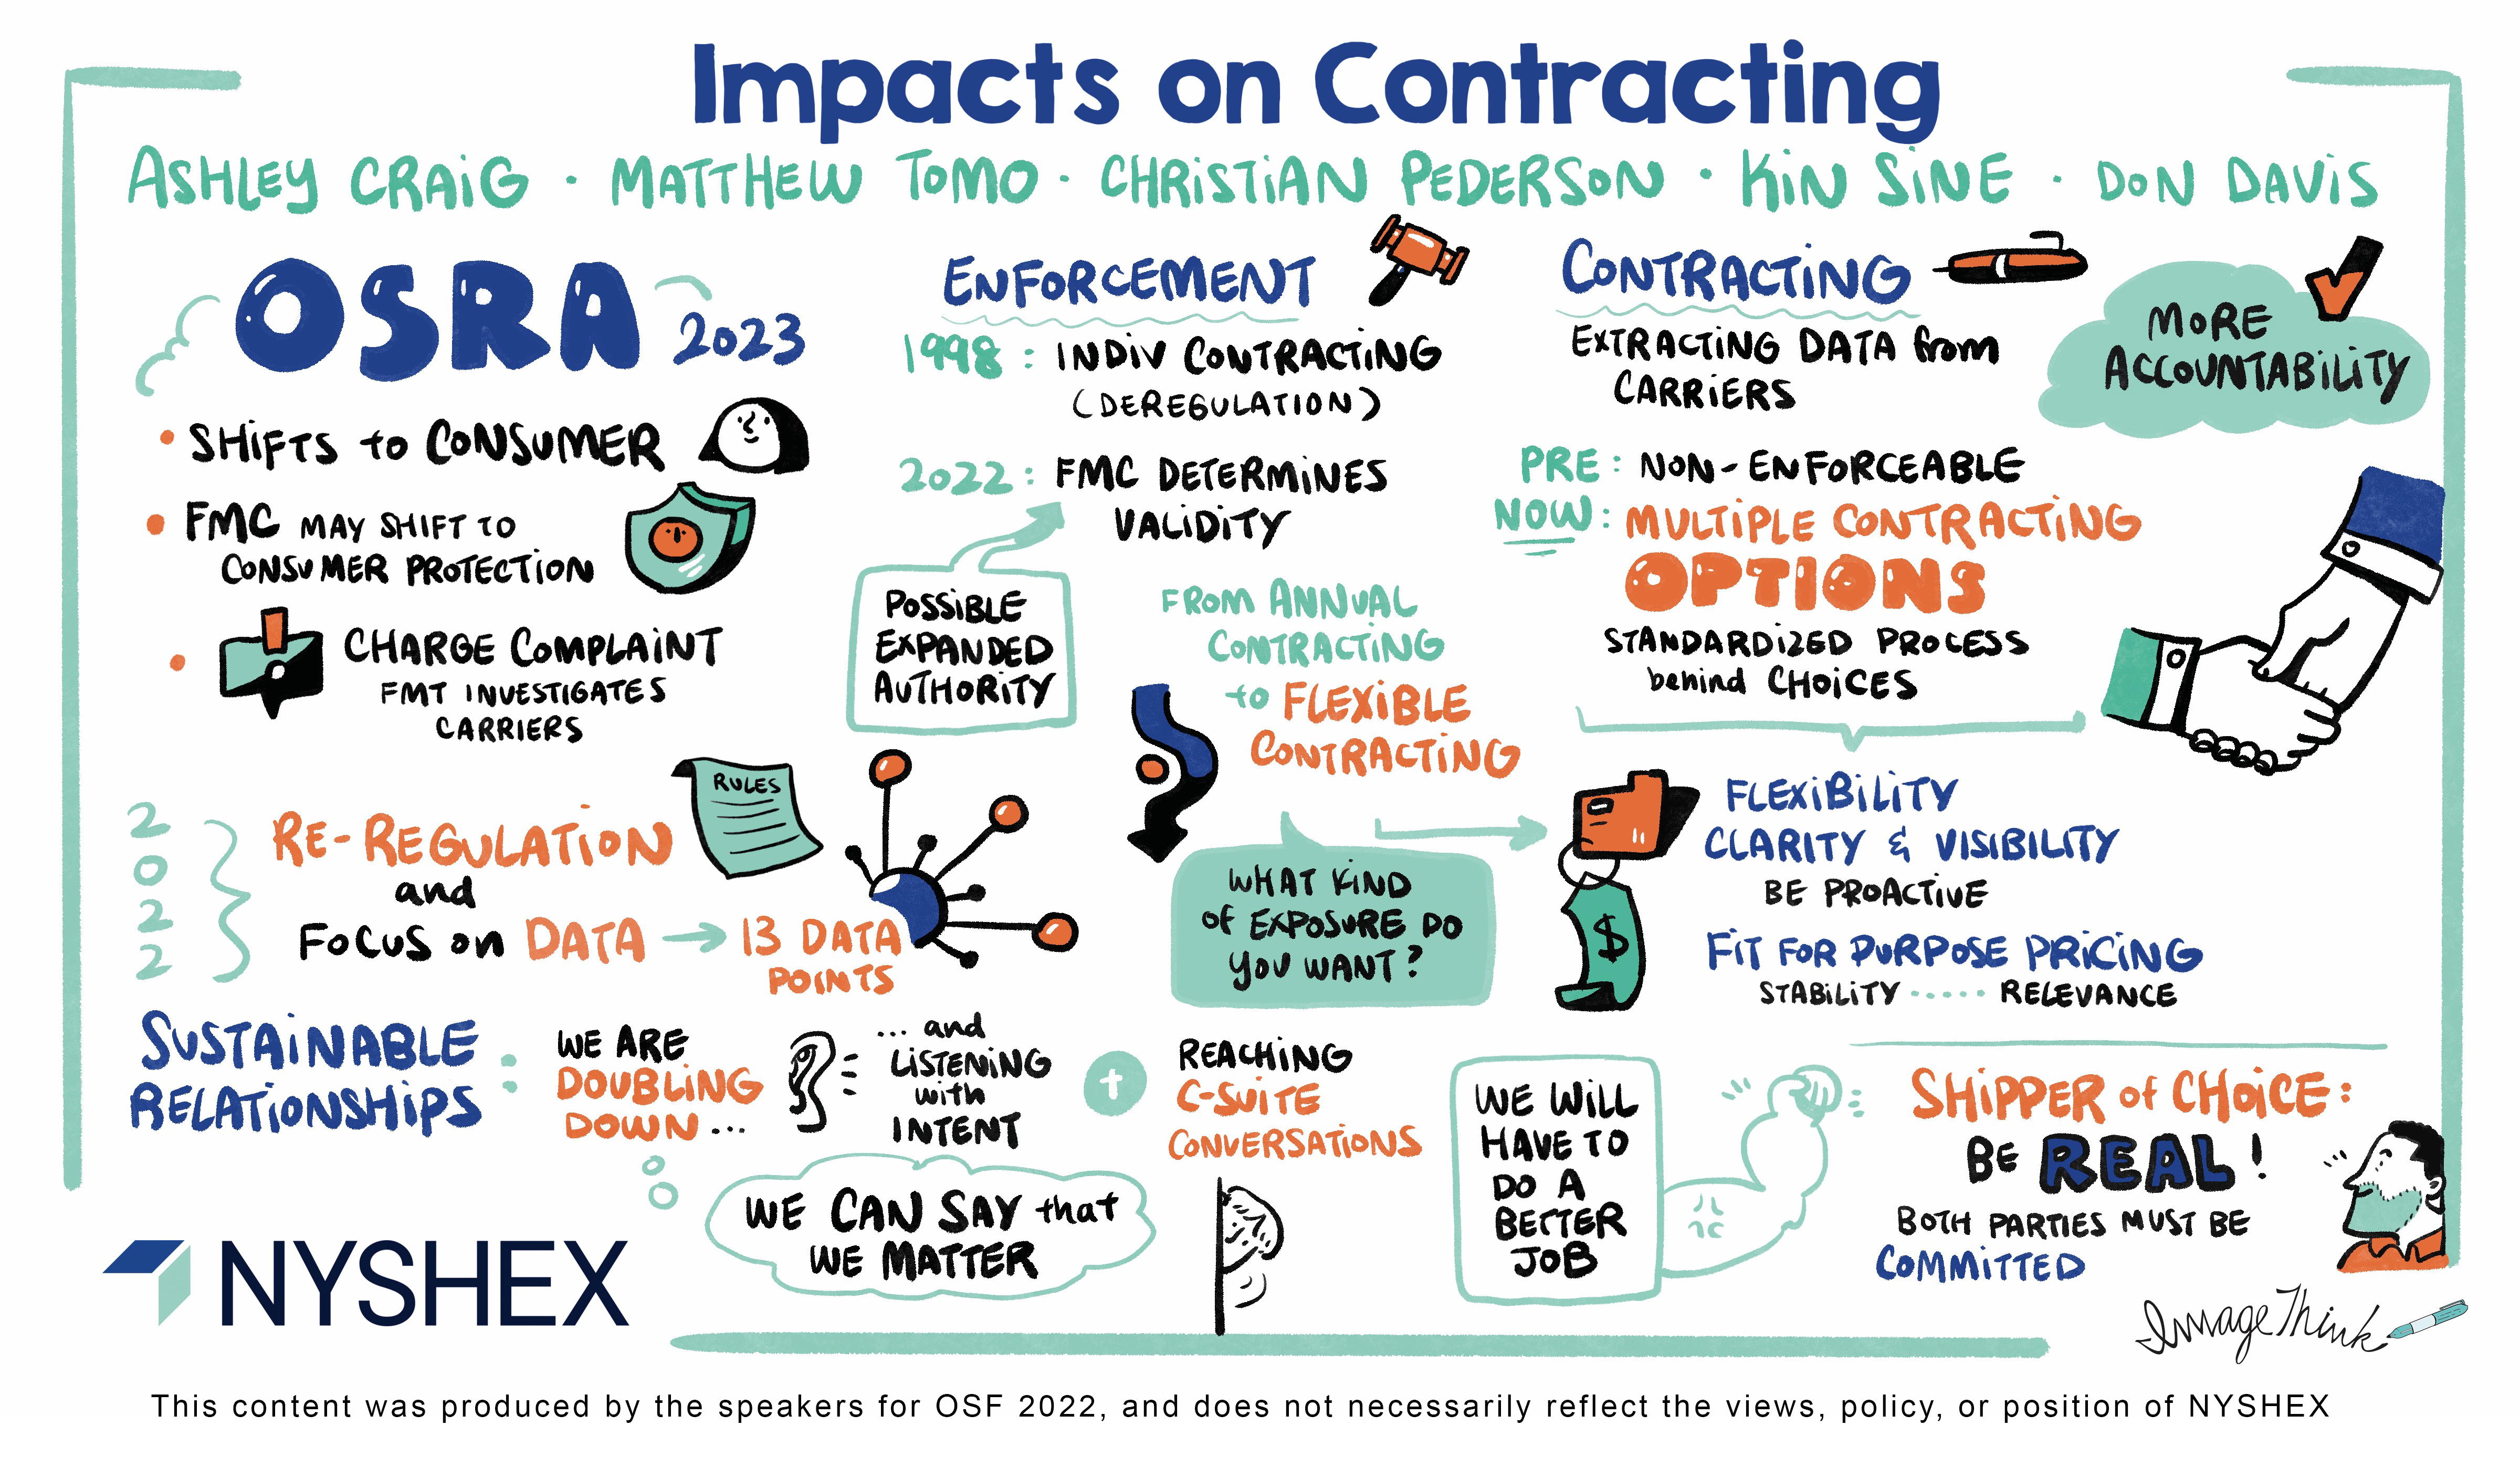 Impacts on Contracting